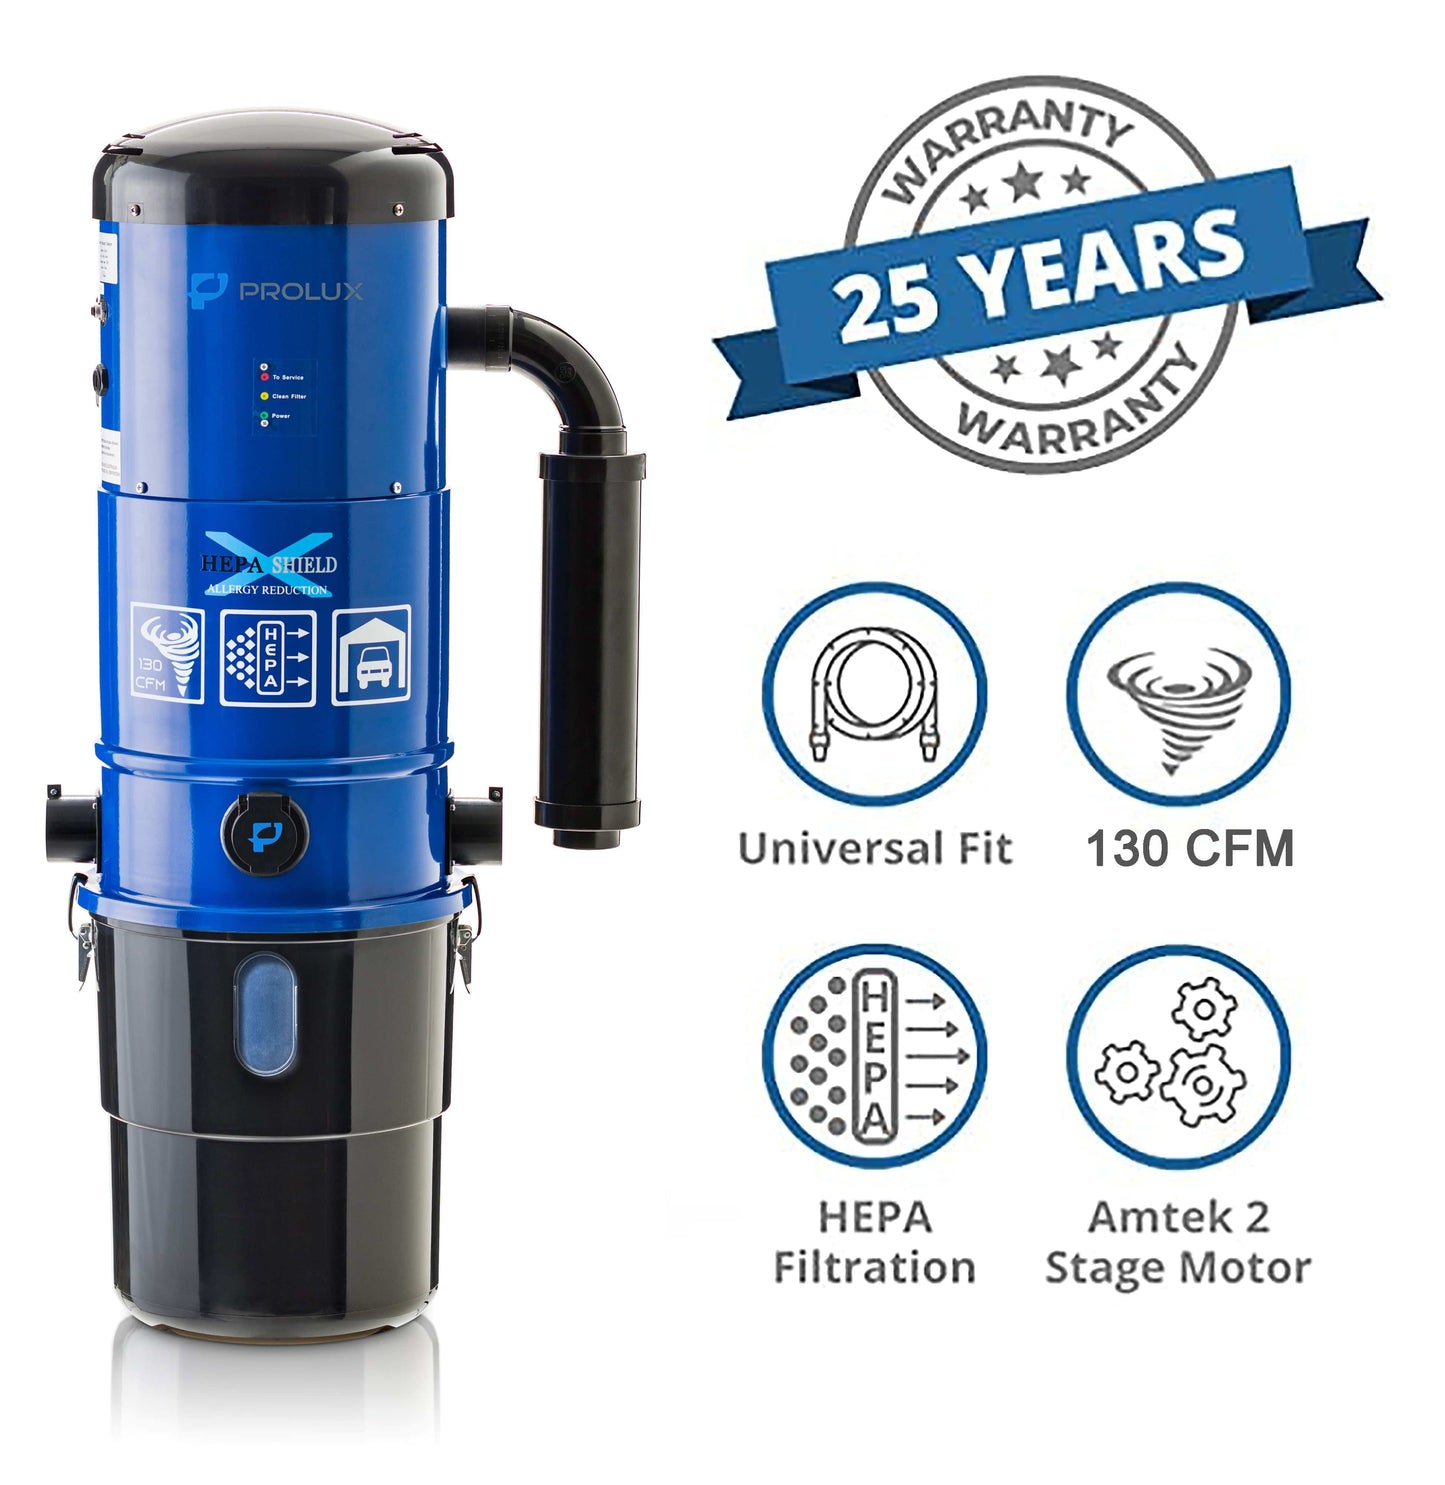 Prolux CV12000 Central Vacuum Power Unit with most powerful 2 speed motor and 25 Year Warranty!